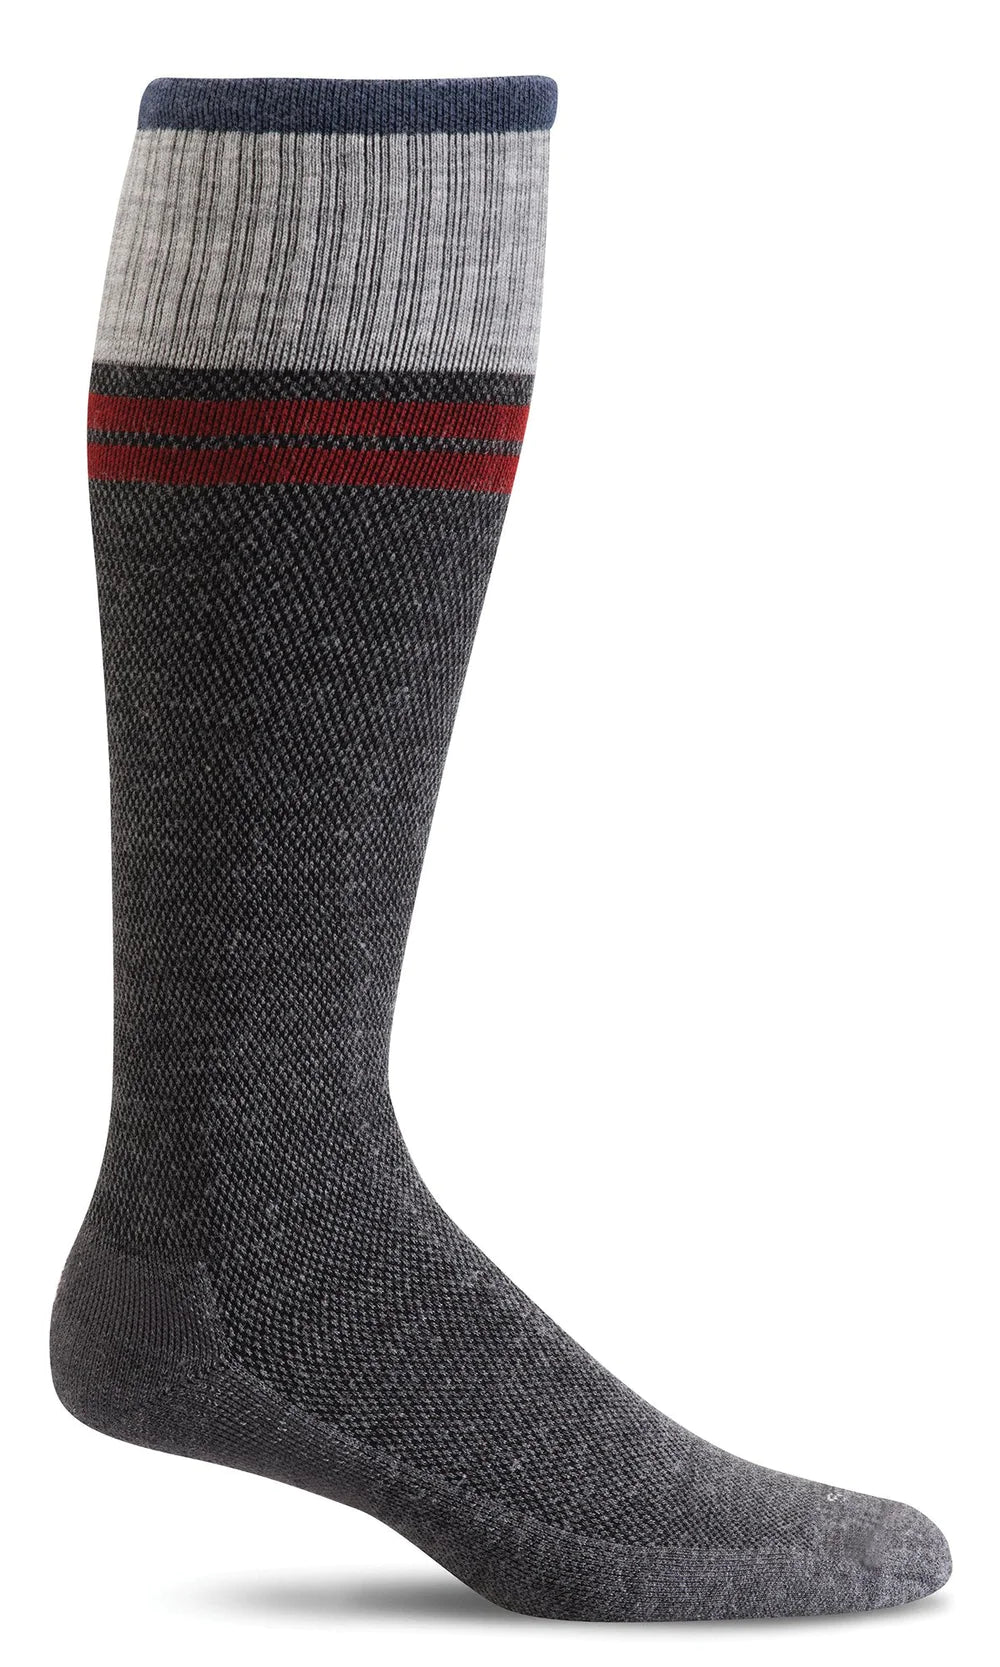 Sockwell Men's Moderate Compression Sock Sportster Charcoal